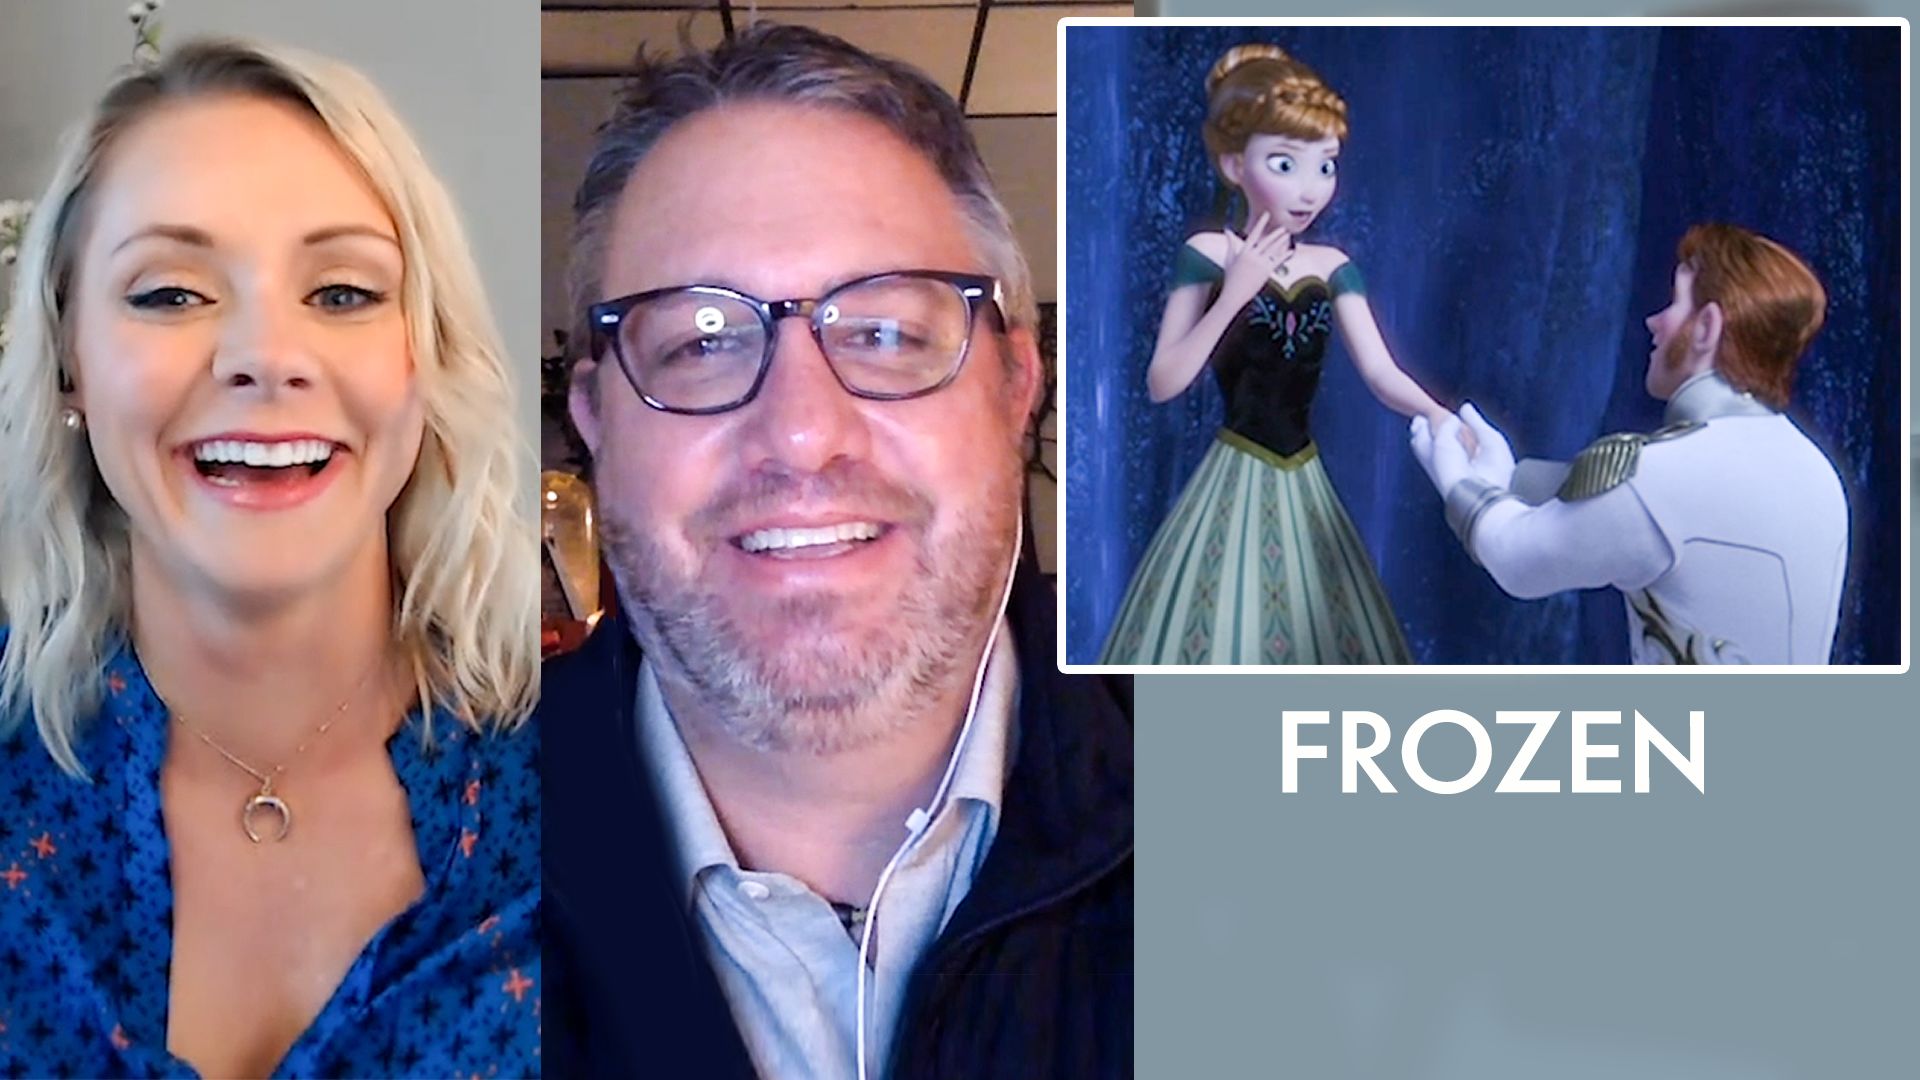 Disney Princess Forced Sex - Watch Therapists Review Disney Relationships, from 'Frozen' to 'The Little  Mermaid' | VF Reviews | Vanity Fair